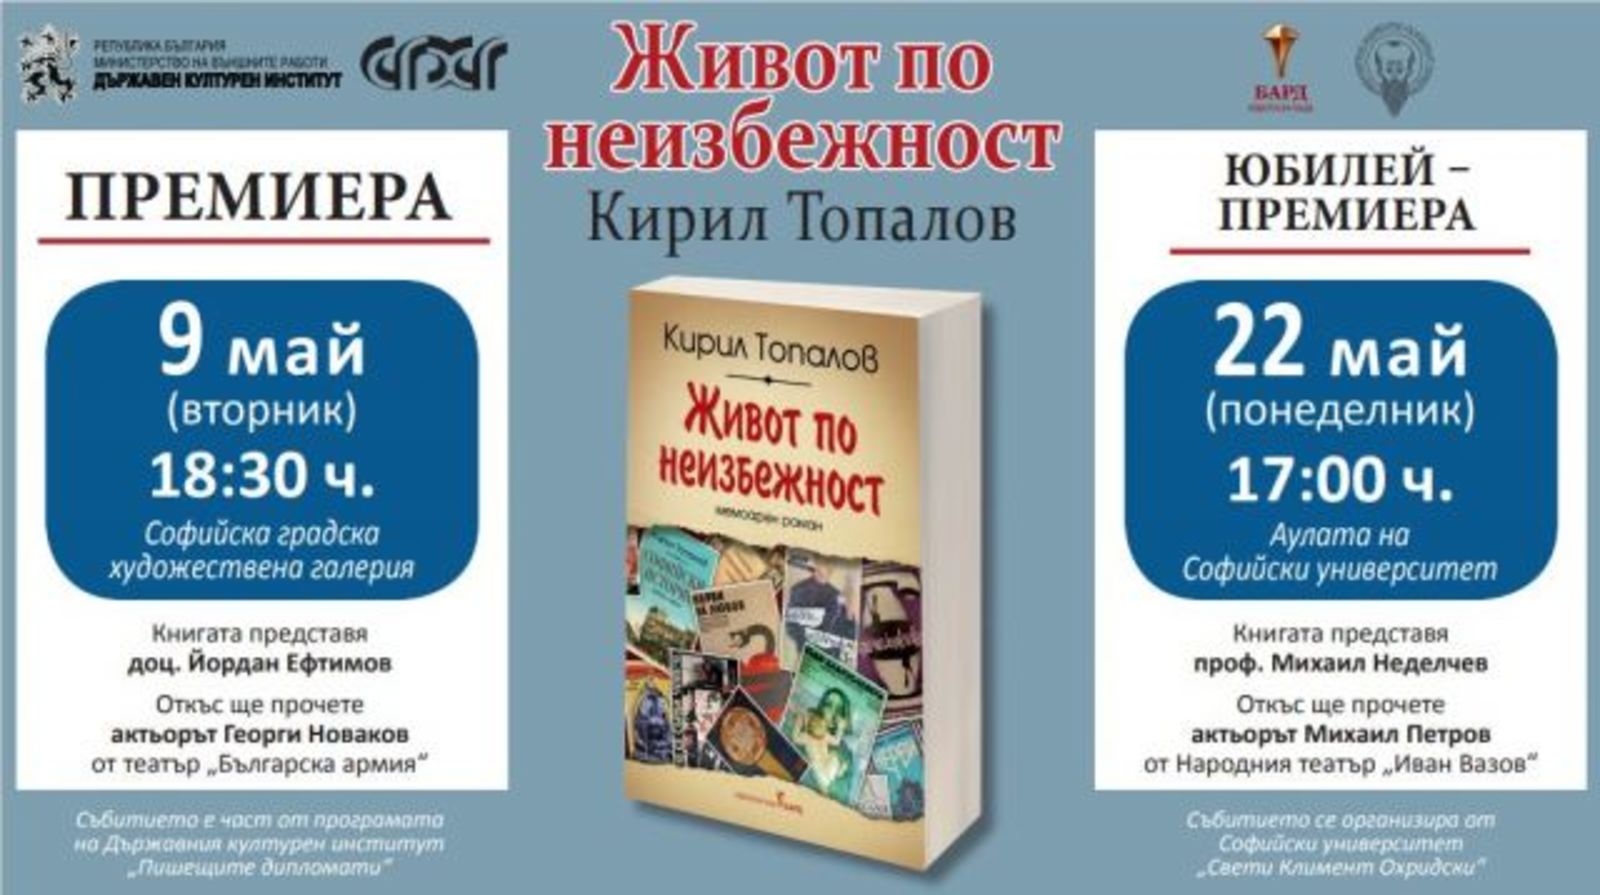 PRESENTATION OF A NEW BOOK BY PROF. KIRILL TOPALOV FROM THE "WRITING DIPLOMATS" PROGRAM